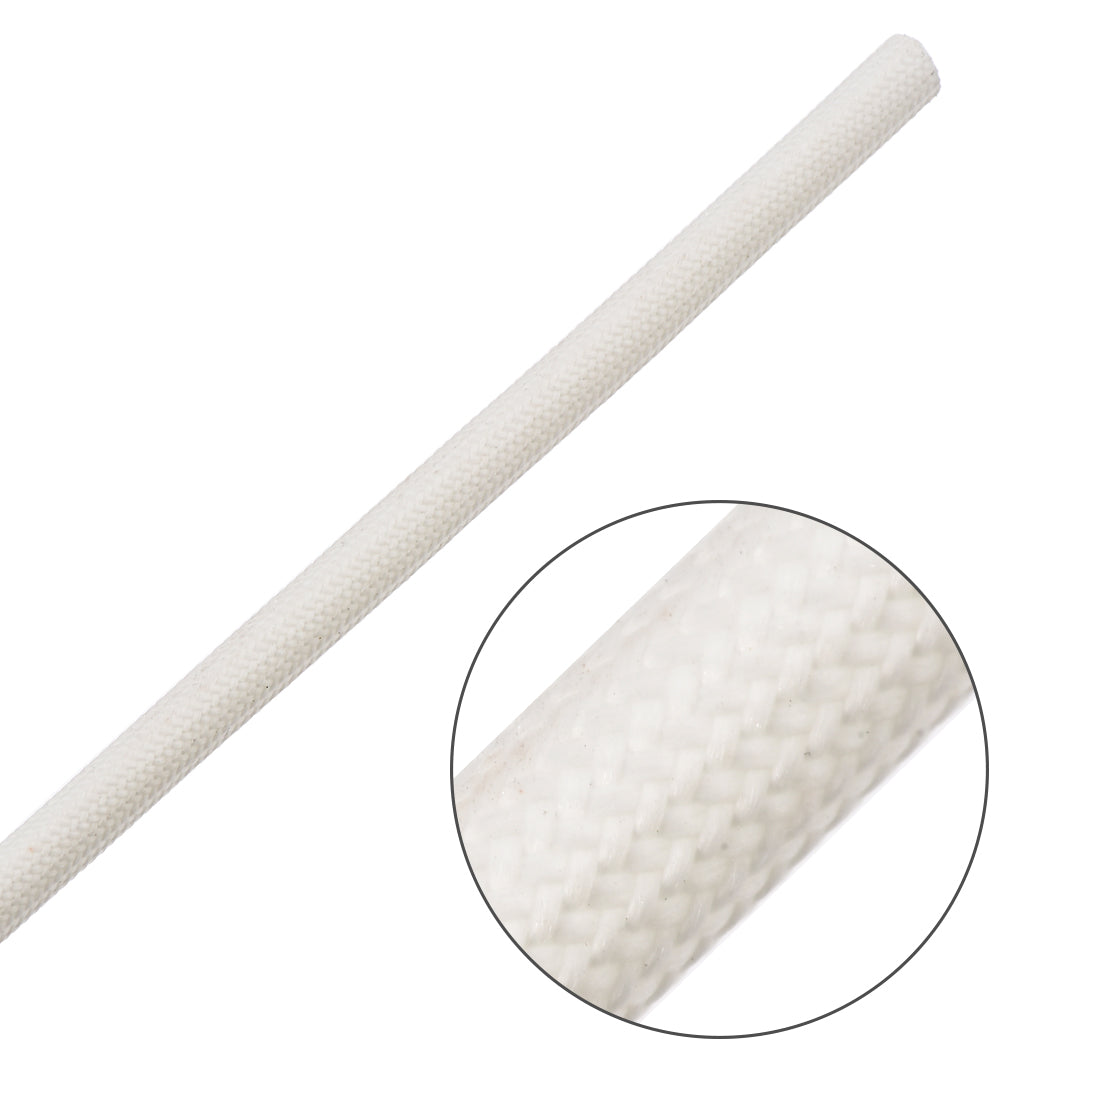 uxcell Uxcell Insulation Cable Protector, 9.8Ft-5mm High TEMP Silicone Fiberglass Sleeve White